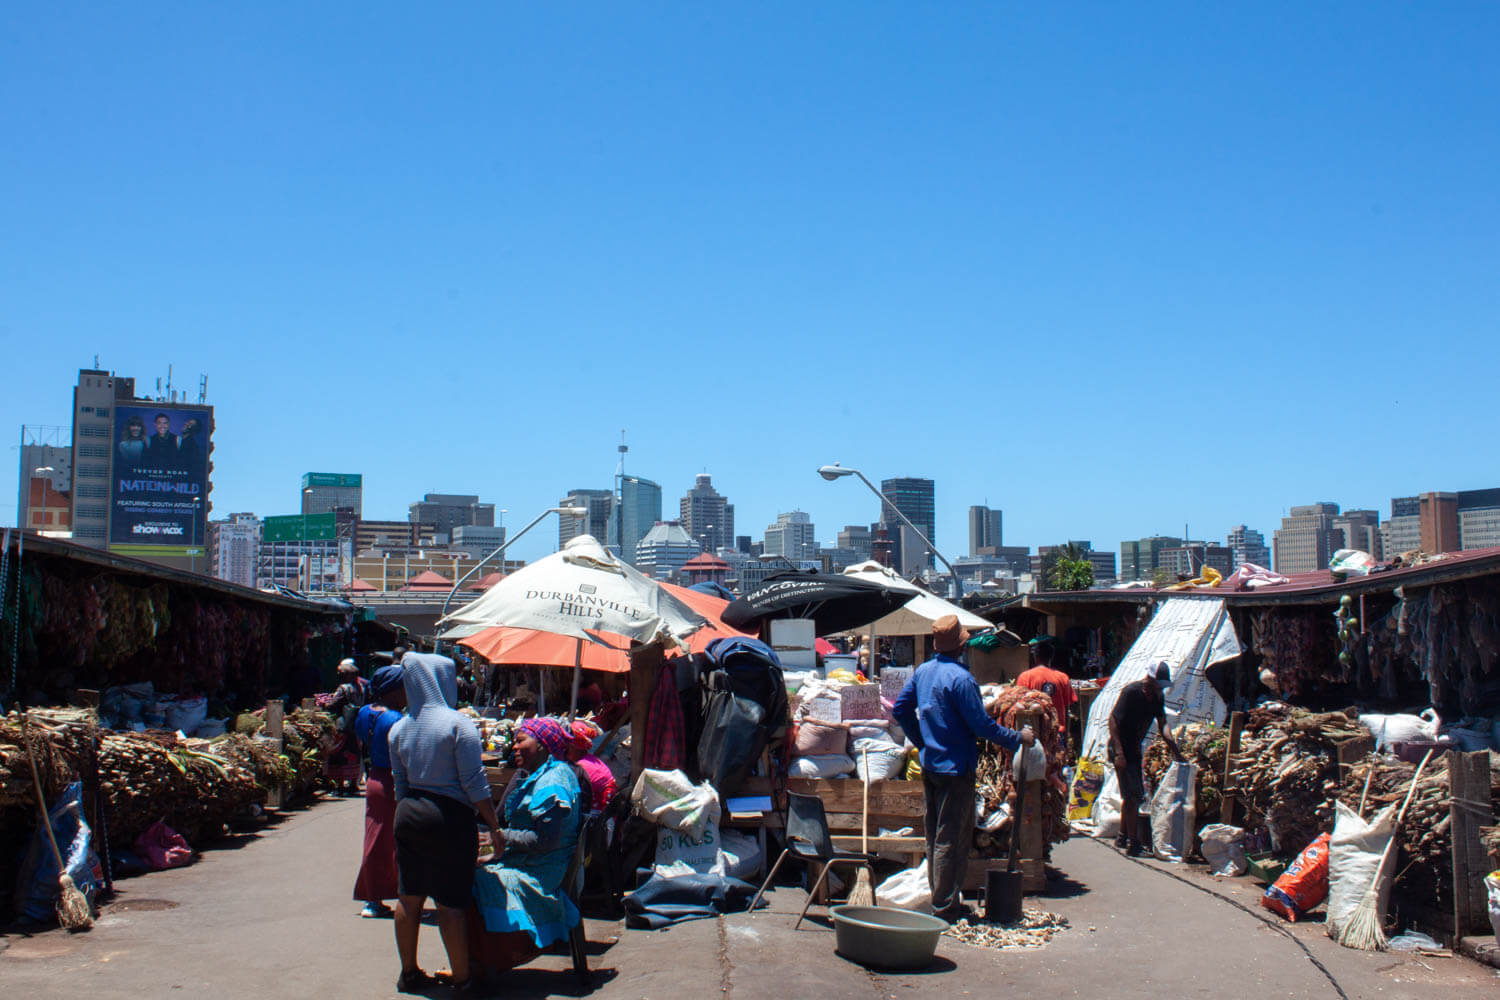 One day in Durban cover image of Warwick Market with downtown in background